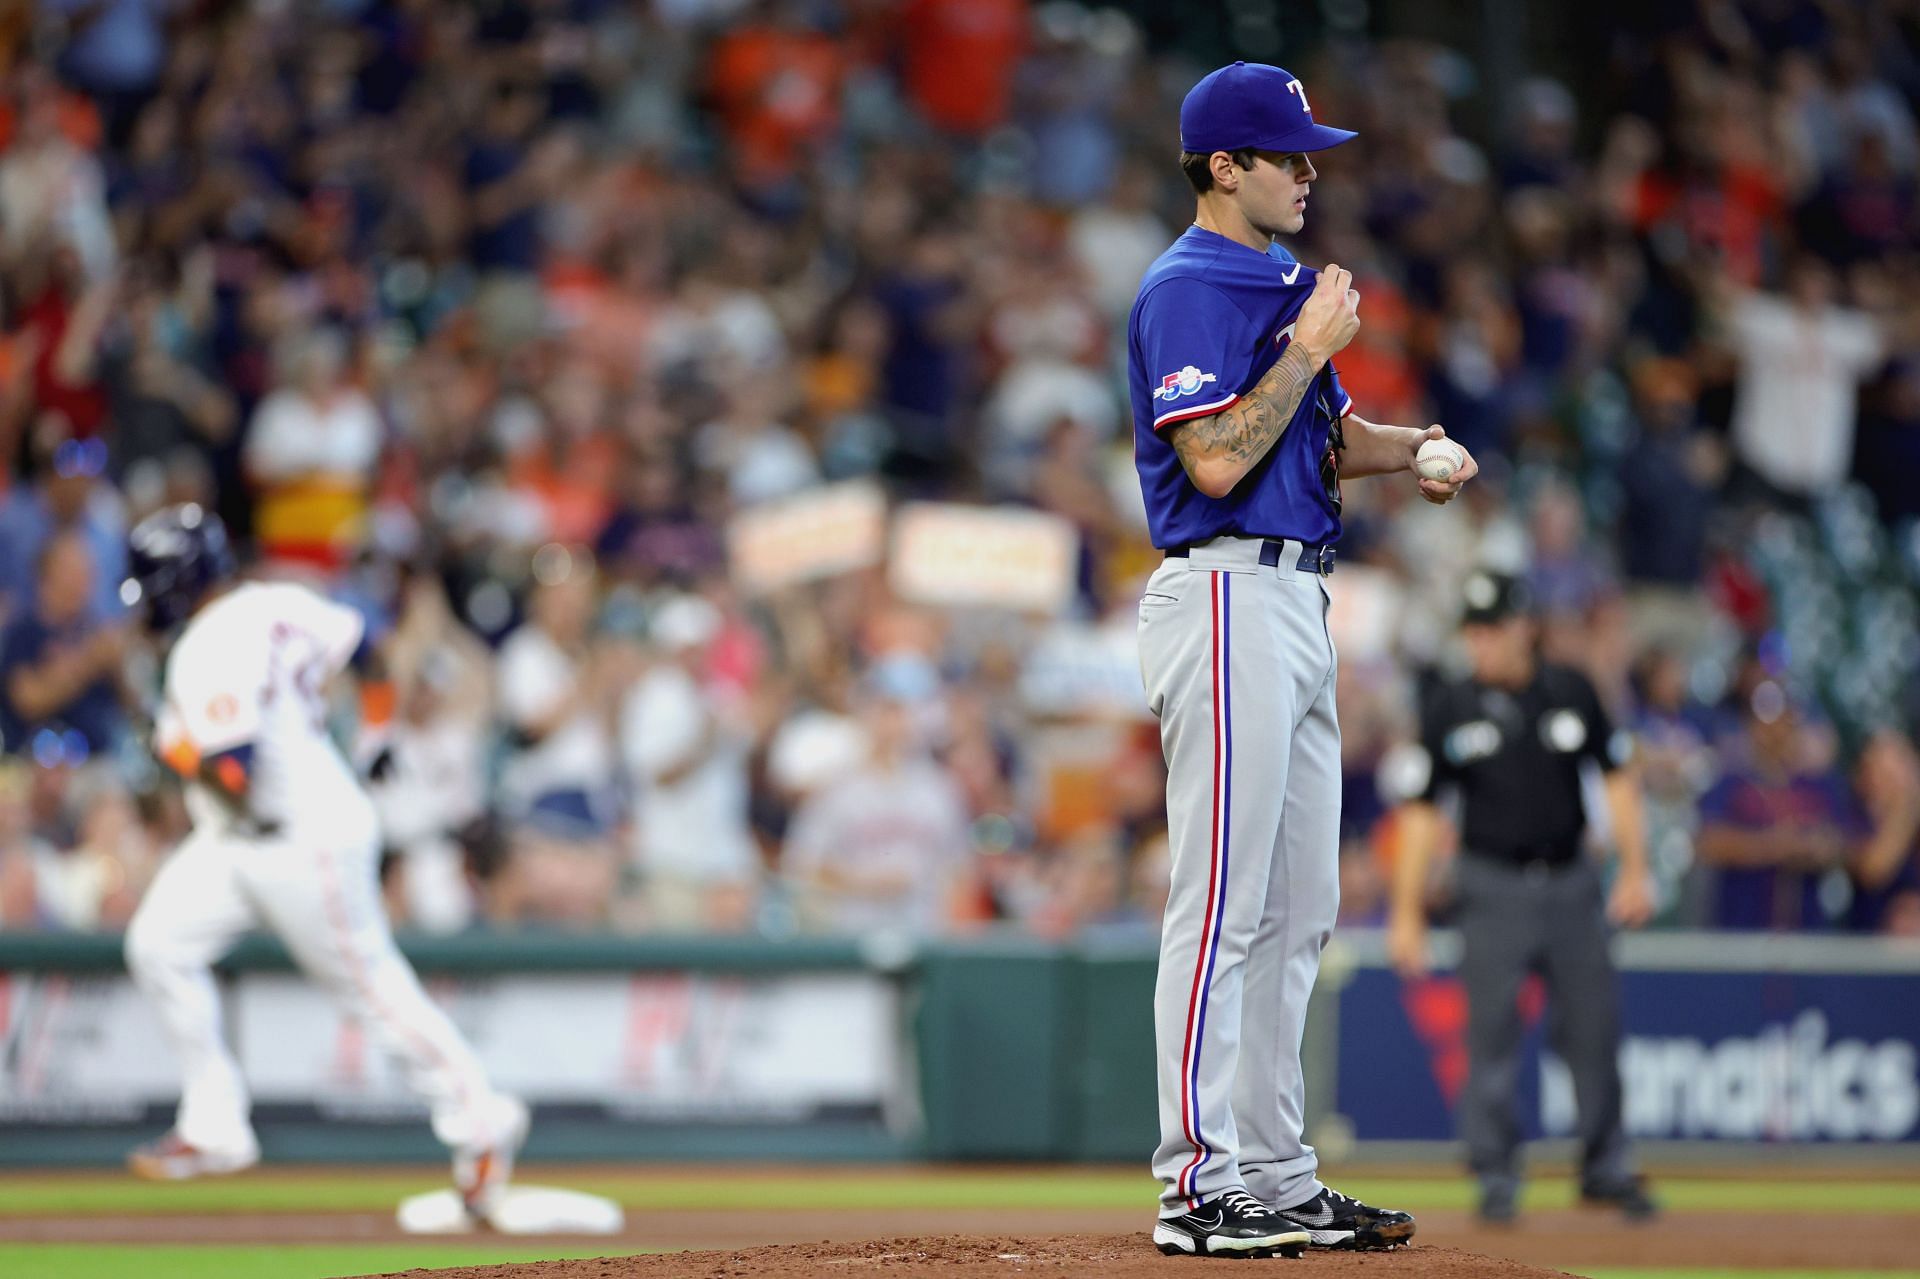 Astros and Rangers fans sound off on the interstate rivalry